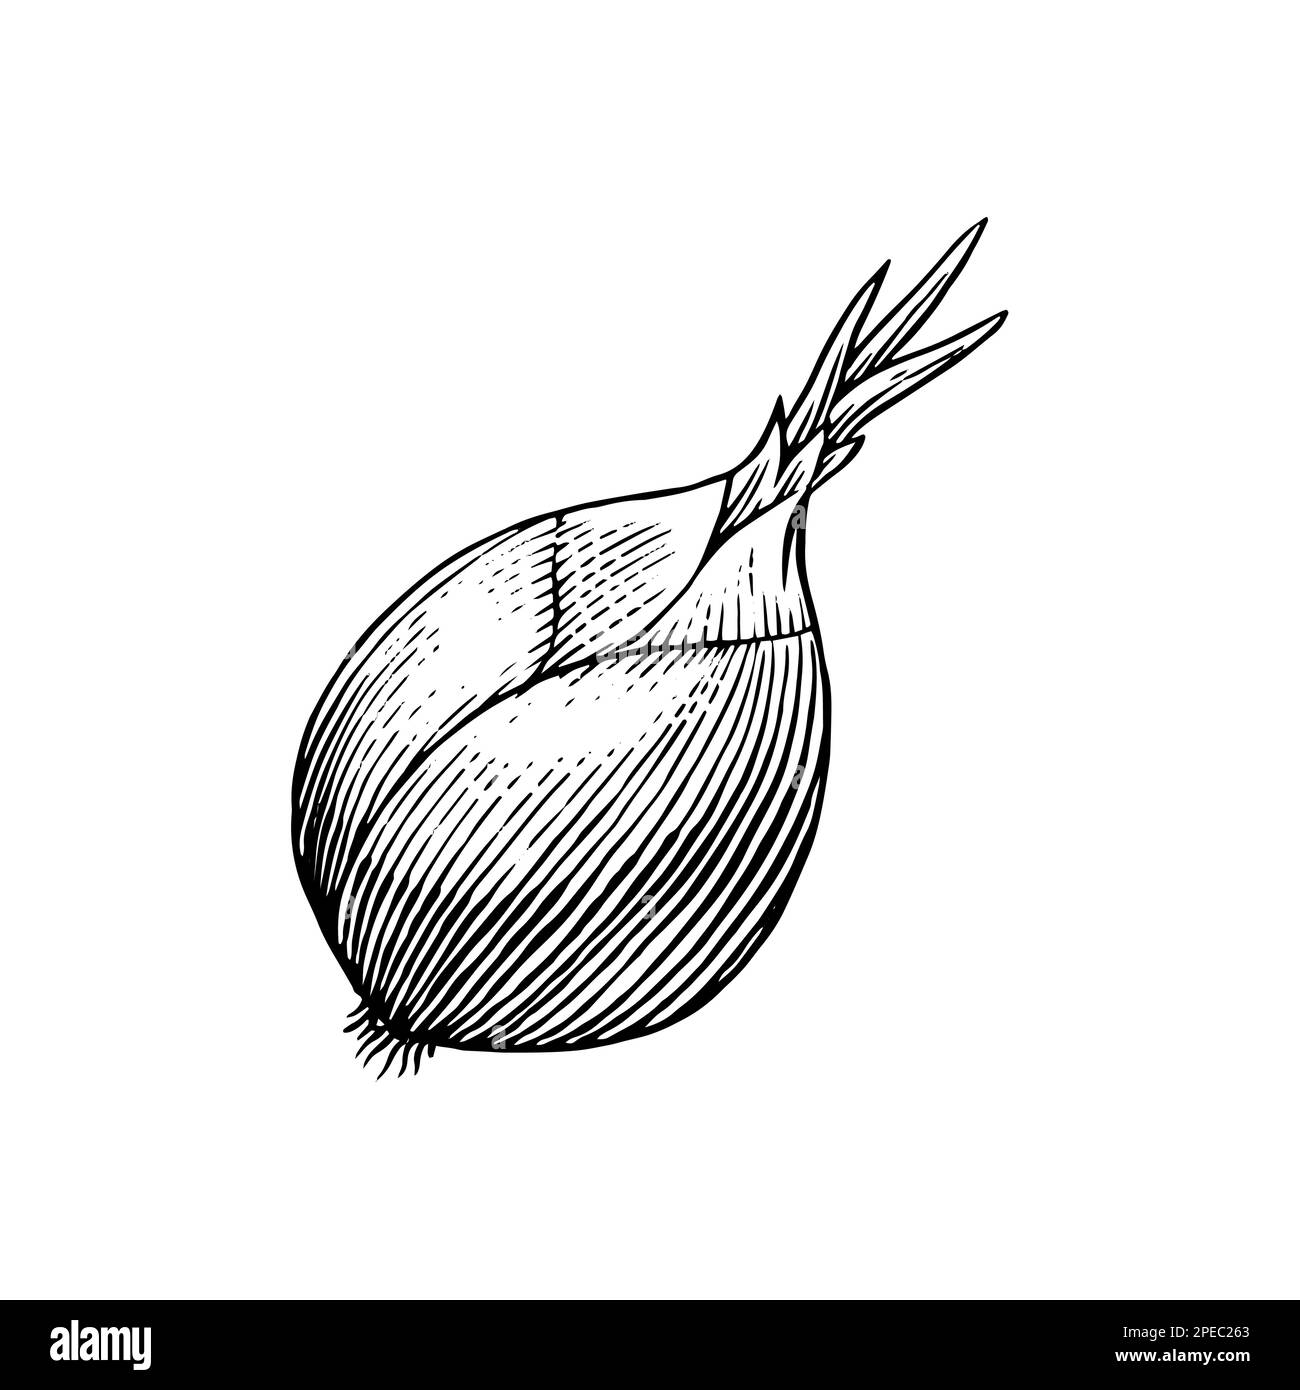 Onion bulb. Hand drawn with ink in vintage style. Linear graphic outline design. Detailed vegetarian food. Vector illustration for label, poster Stock Vector